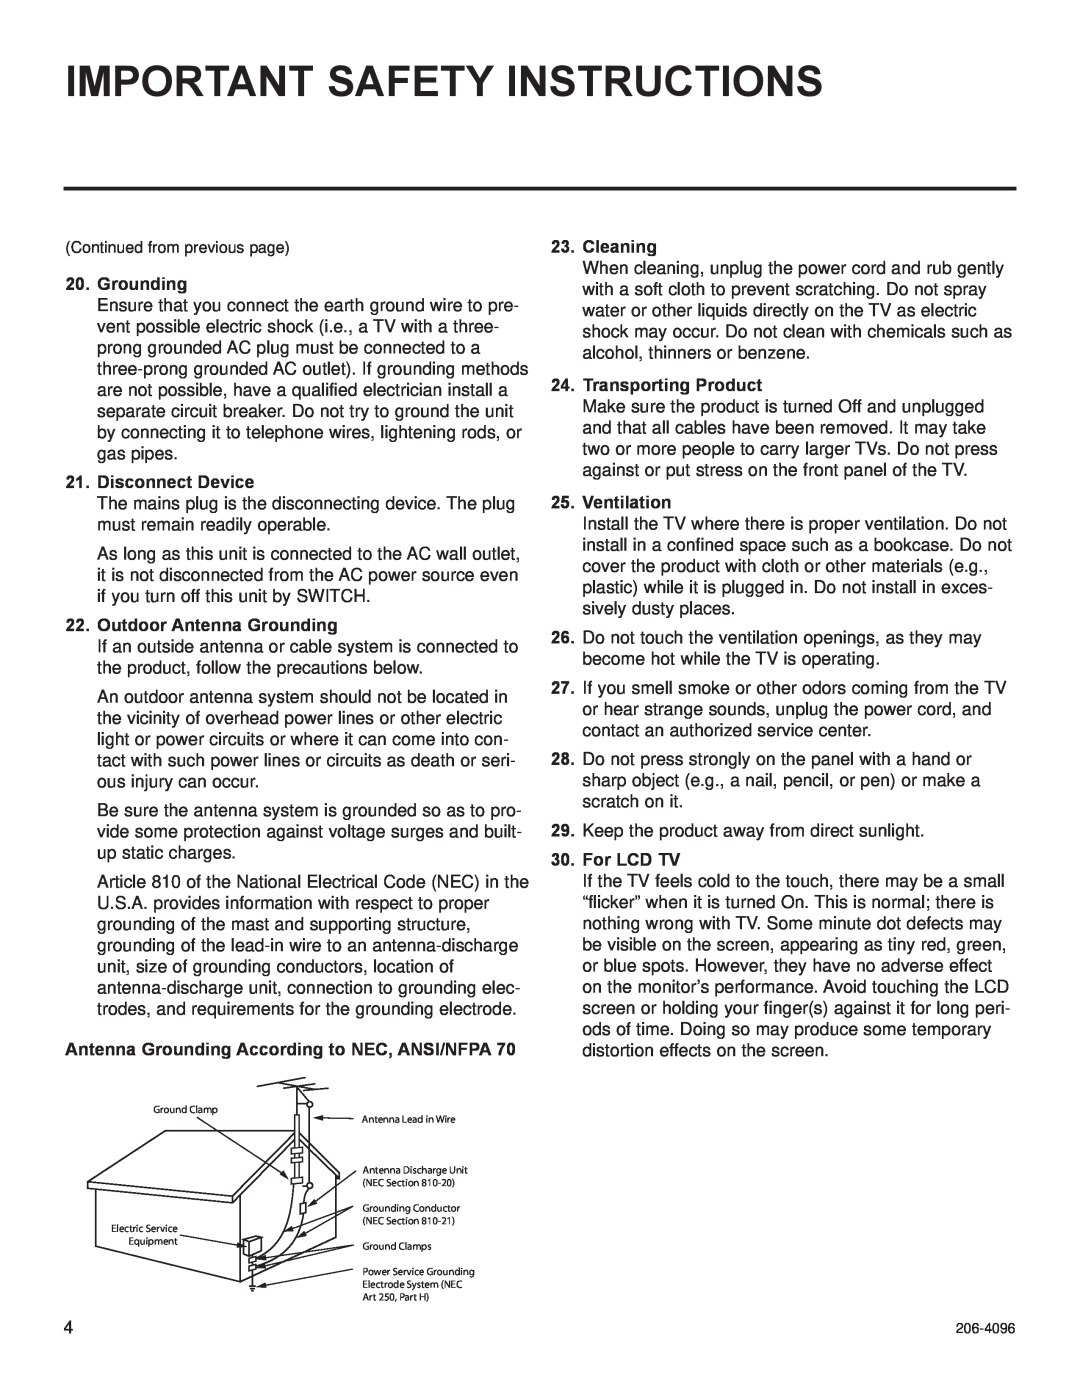 LG Electronics 26LG3DCH Important Safety Instructions, Disconnect Device, Outdoor Antenna Grounding, Cleaning 